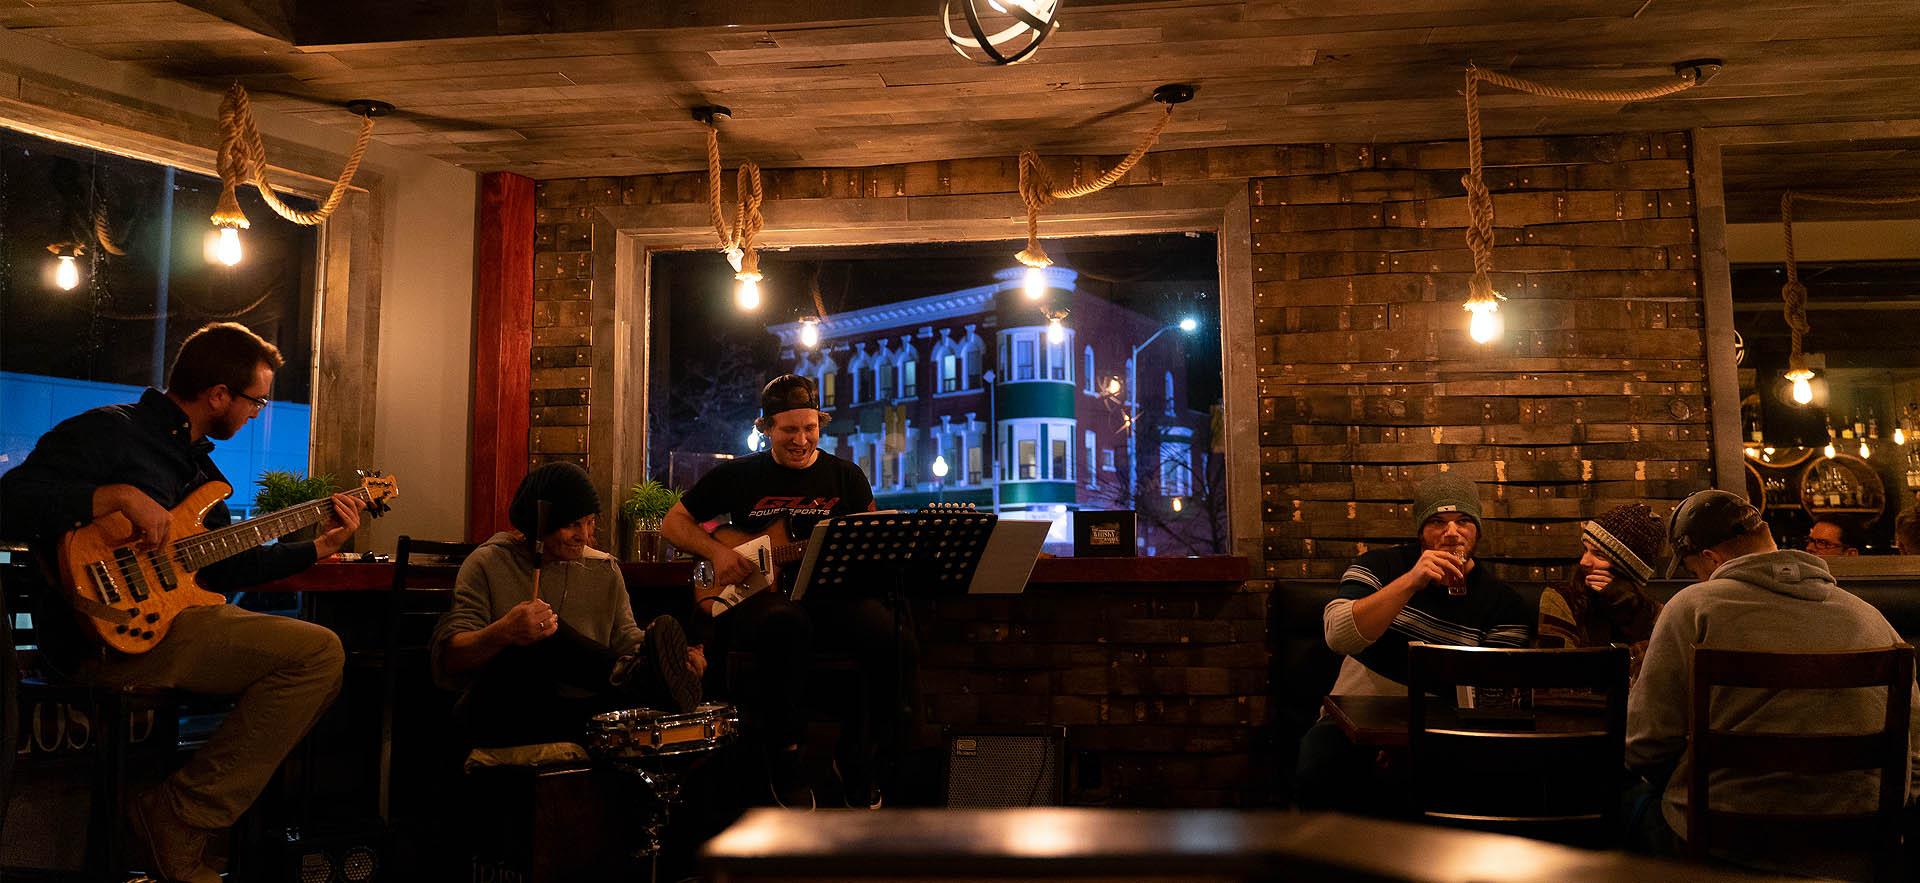 Musicians and viewers in a bar at night